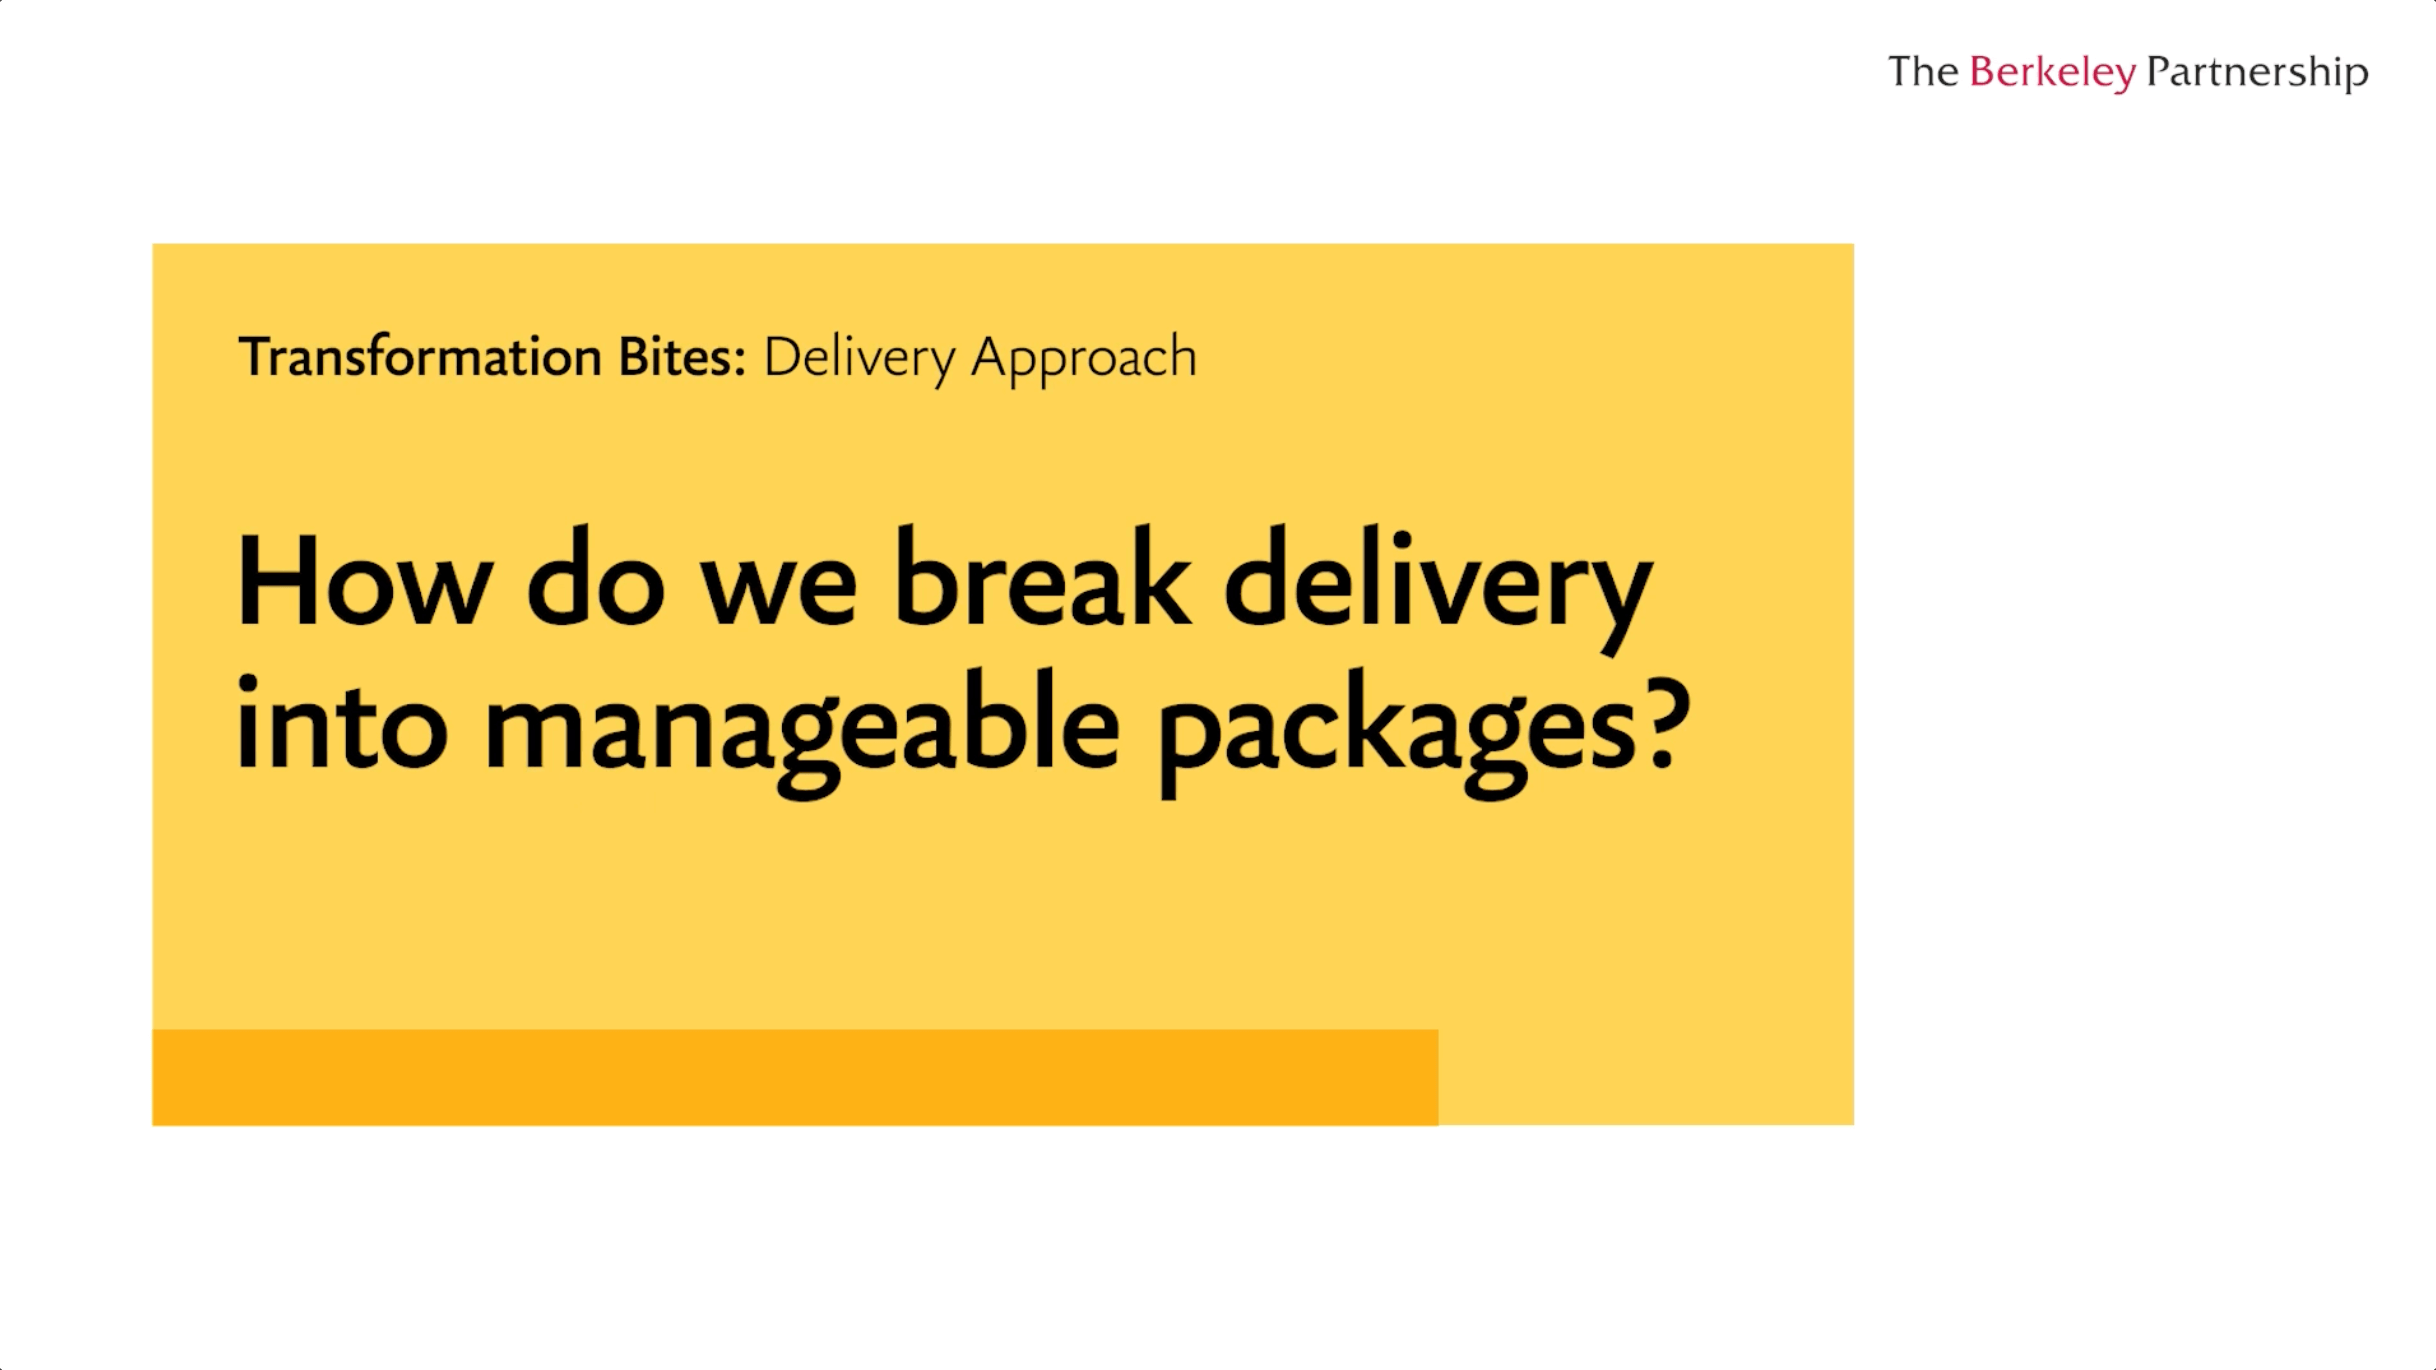 How do we break delivery into manageable packages?